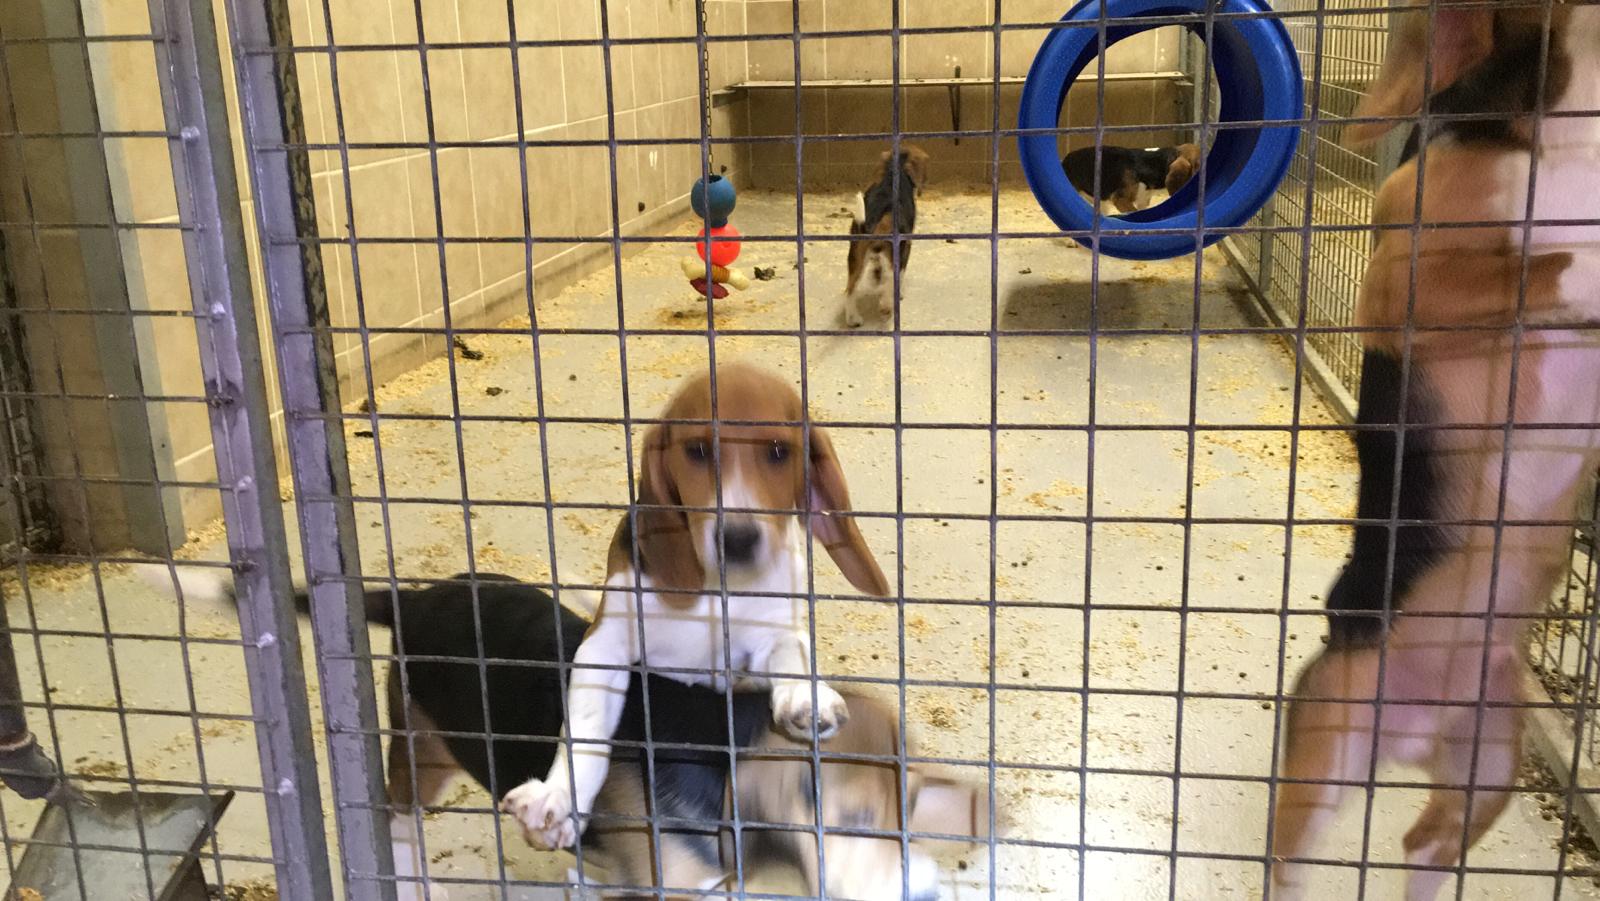 Beagles at an MBR animal testing facility before being rescued